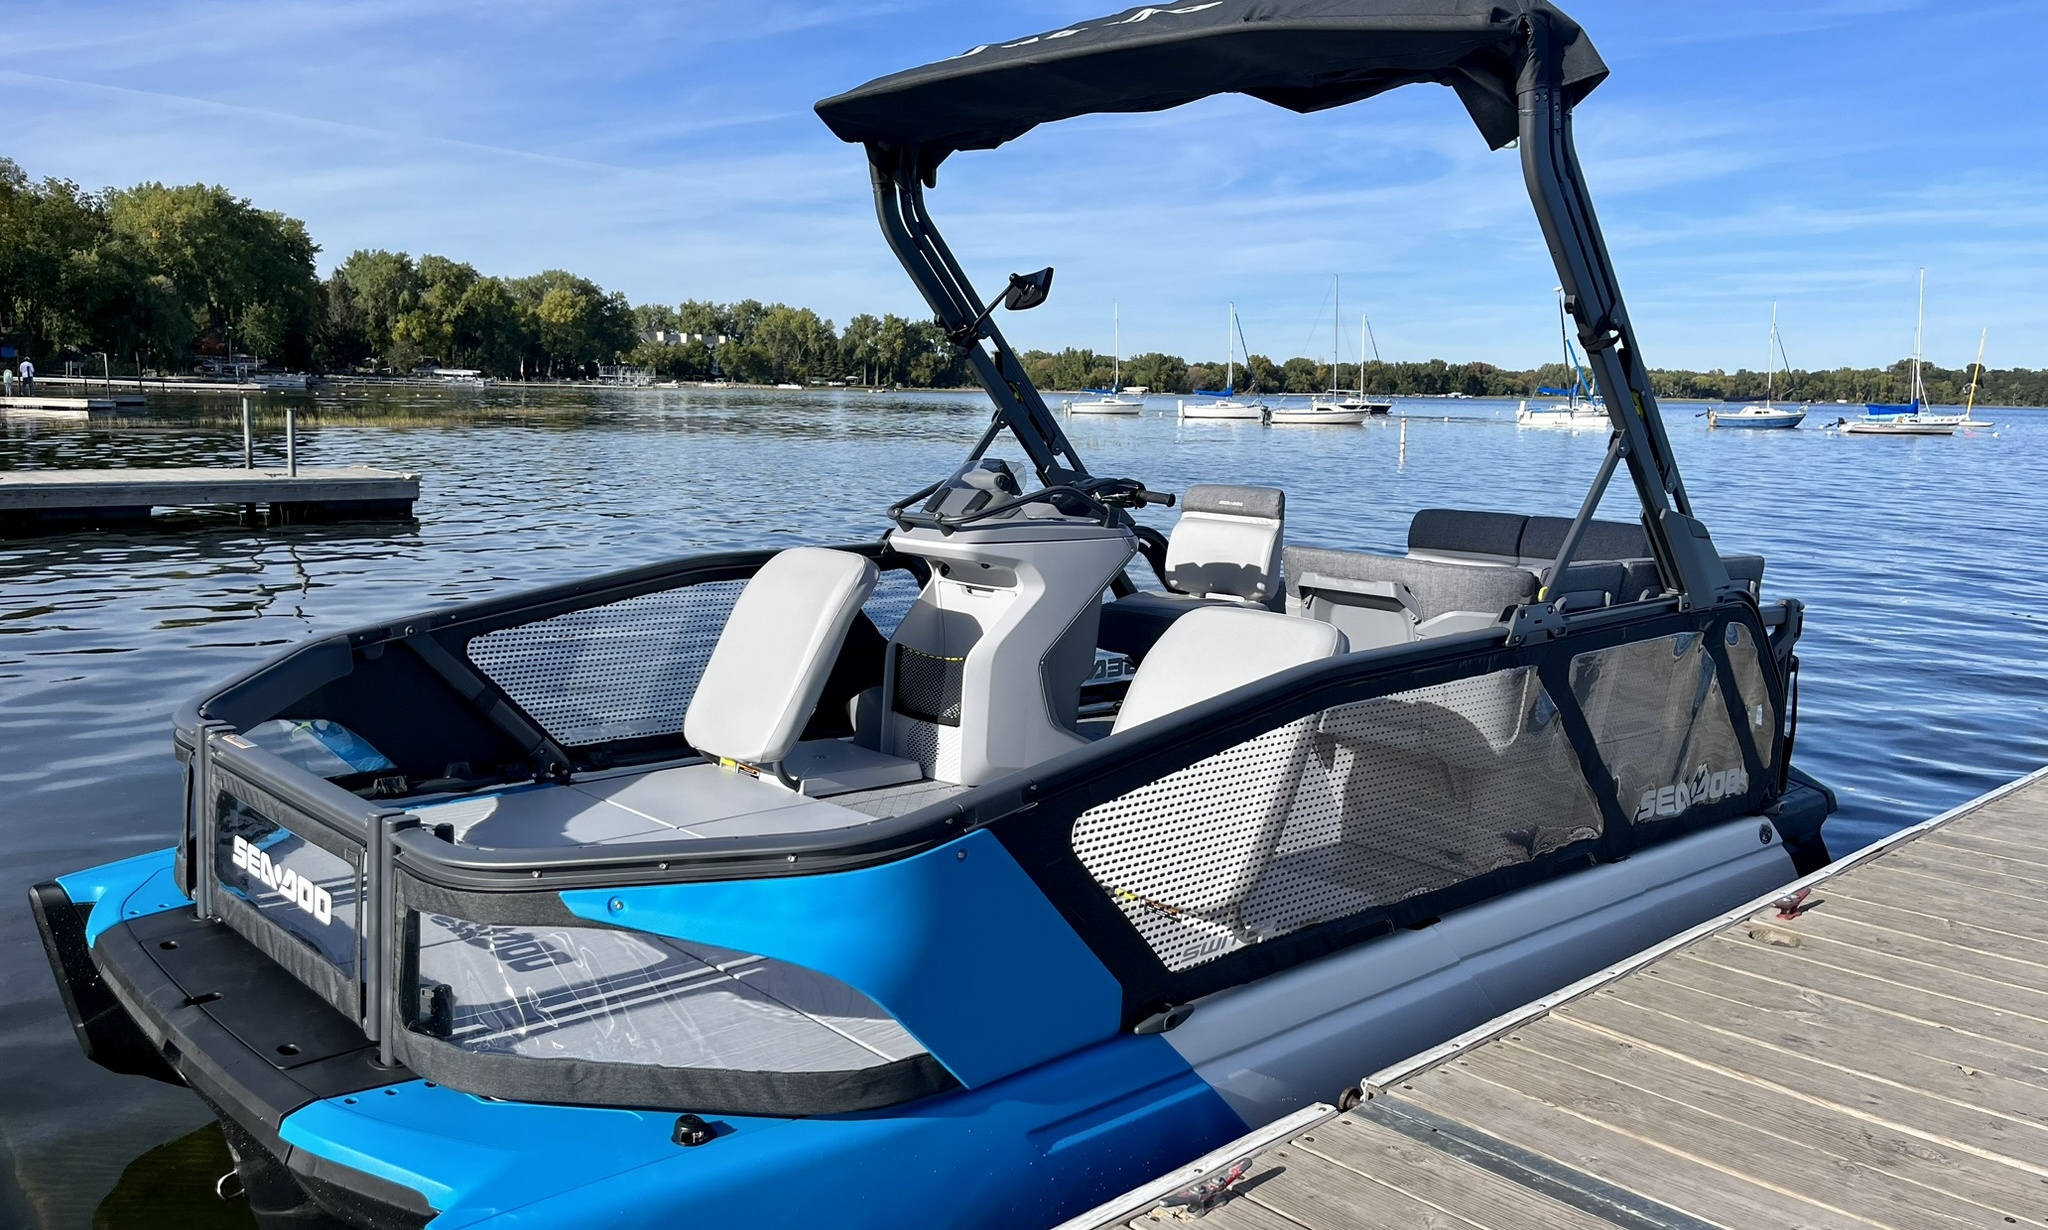 Looking for the Sea-Doo Switch Pontoon boat for sale? LOOK NO